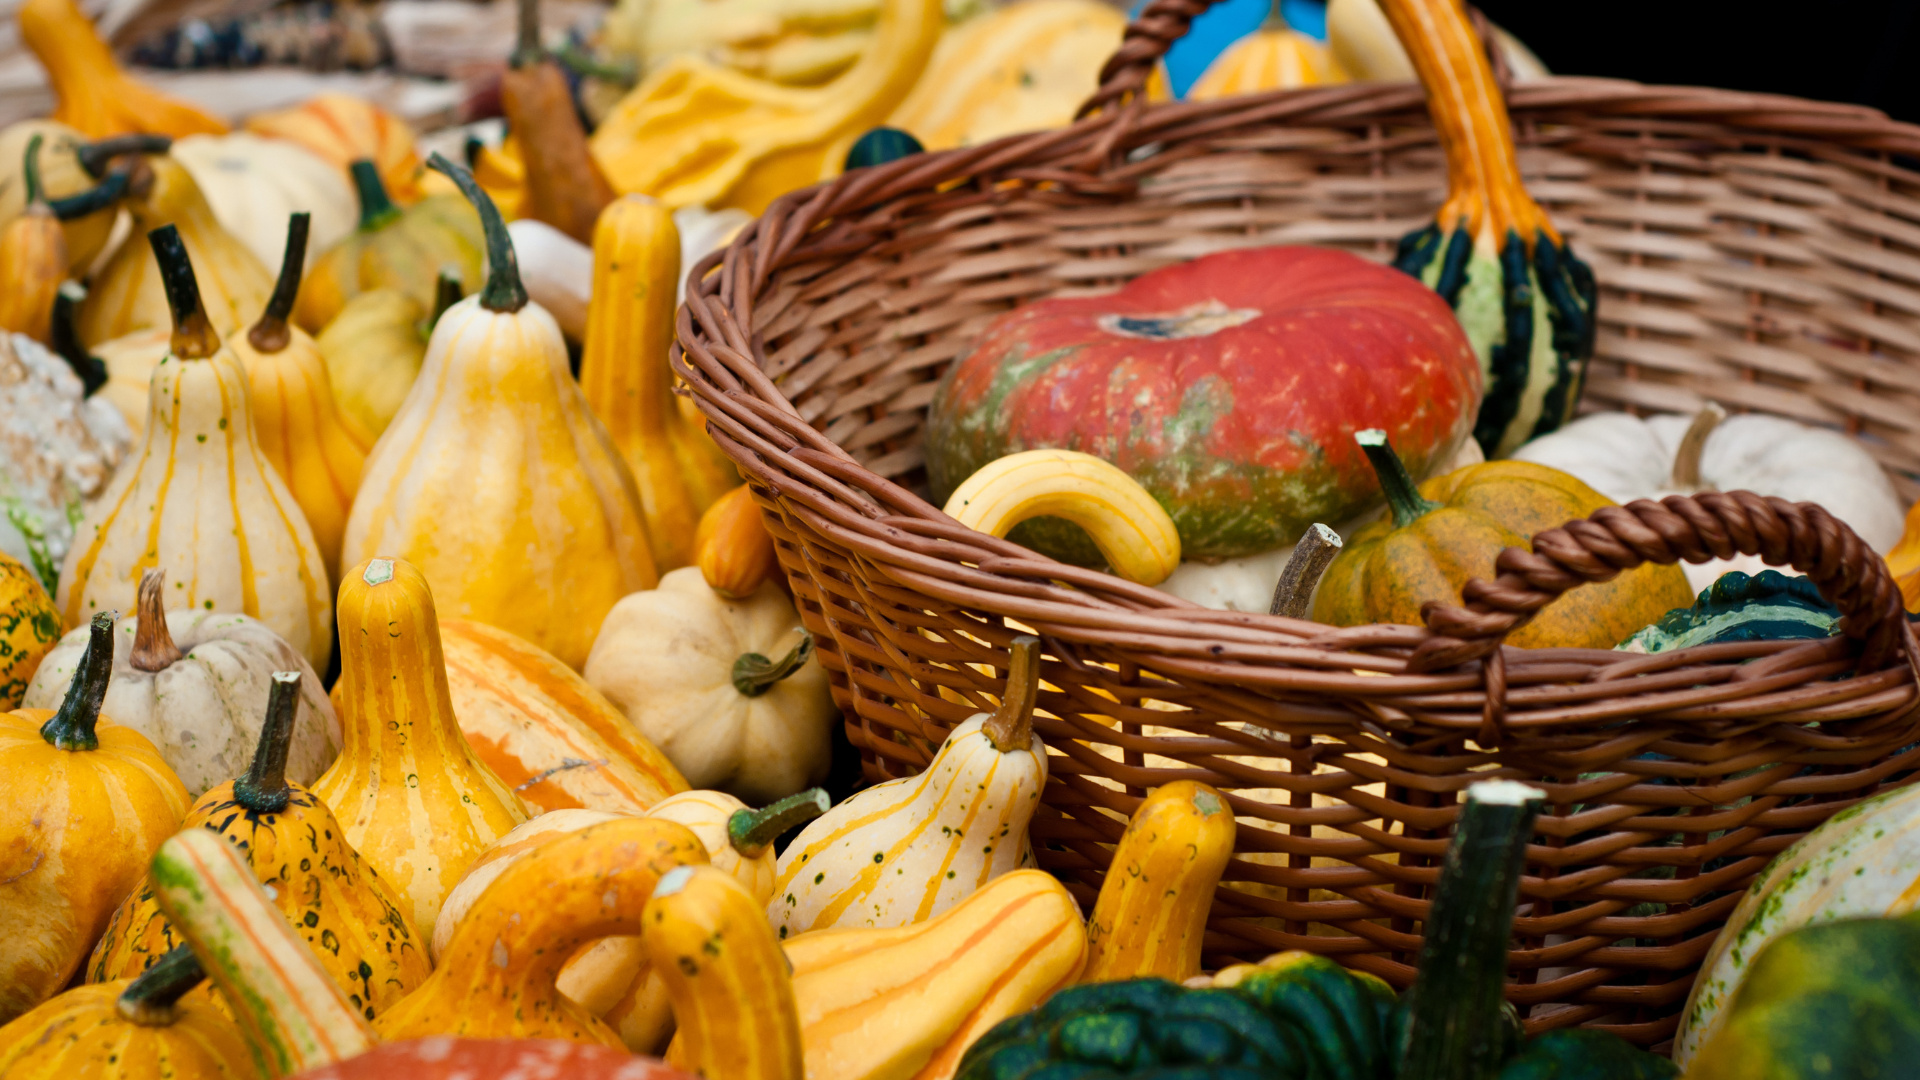 squash and other fall foods are pictured in a basket...